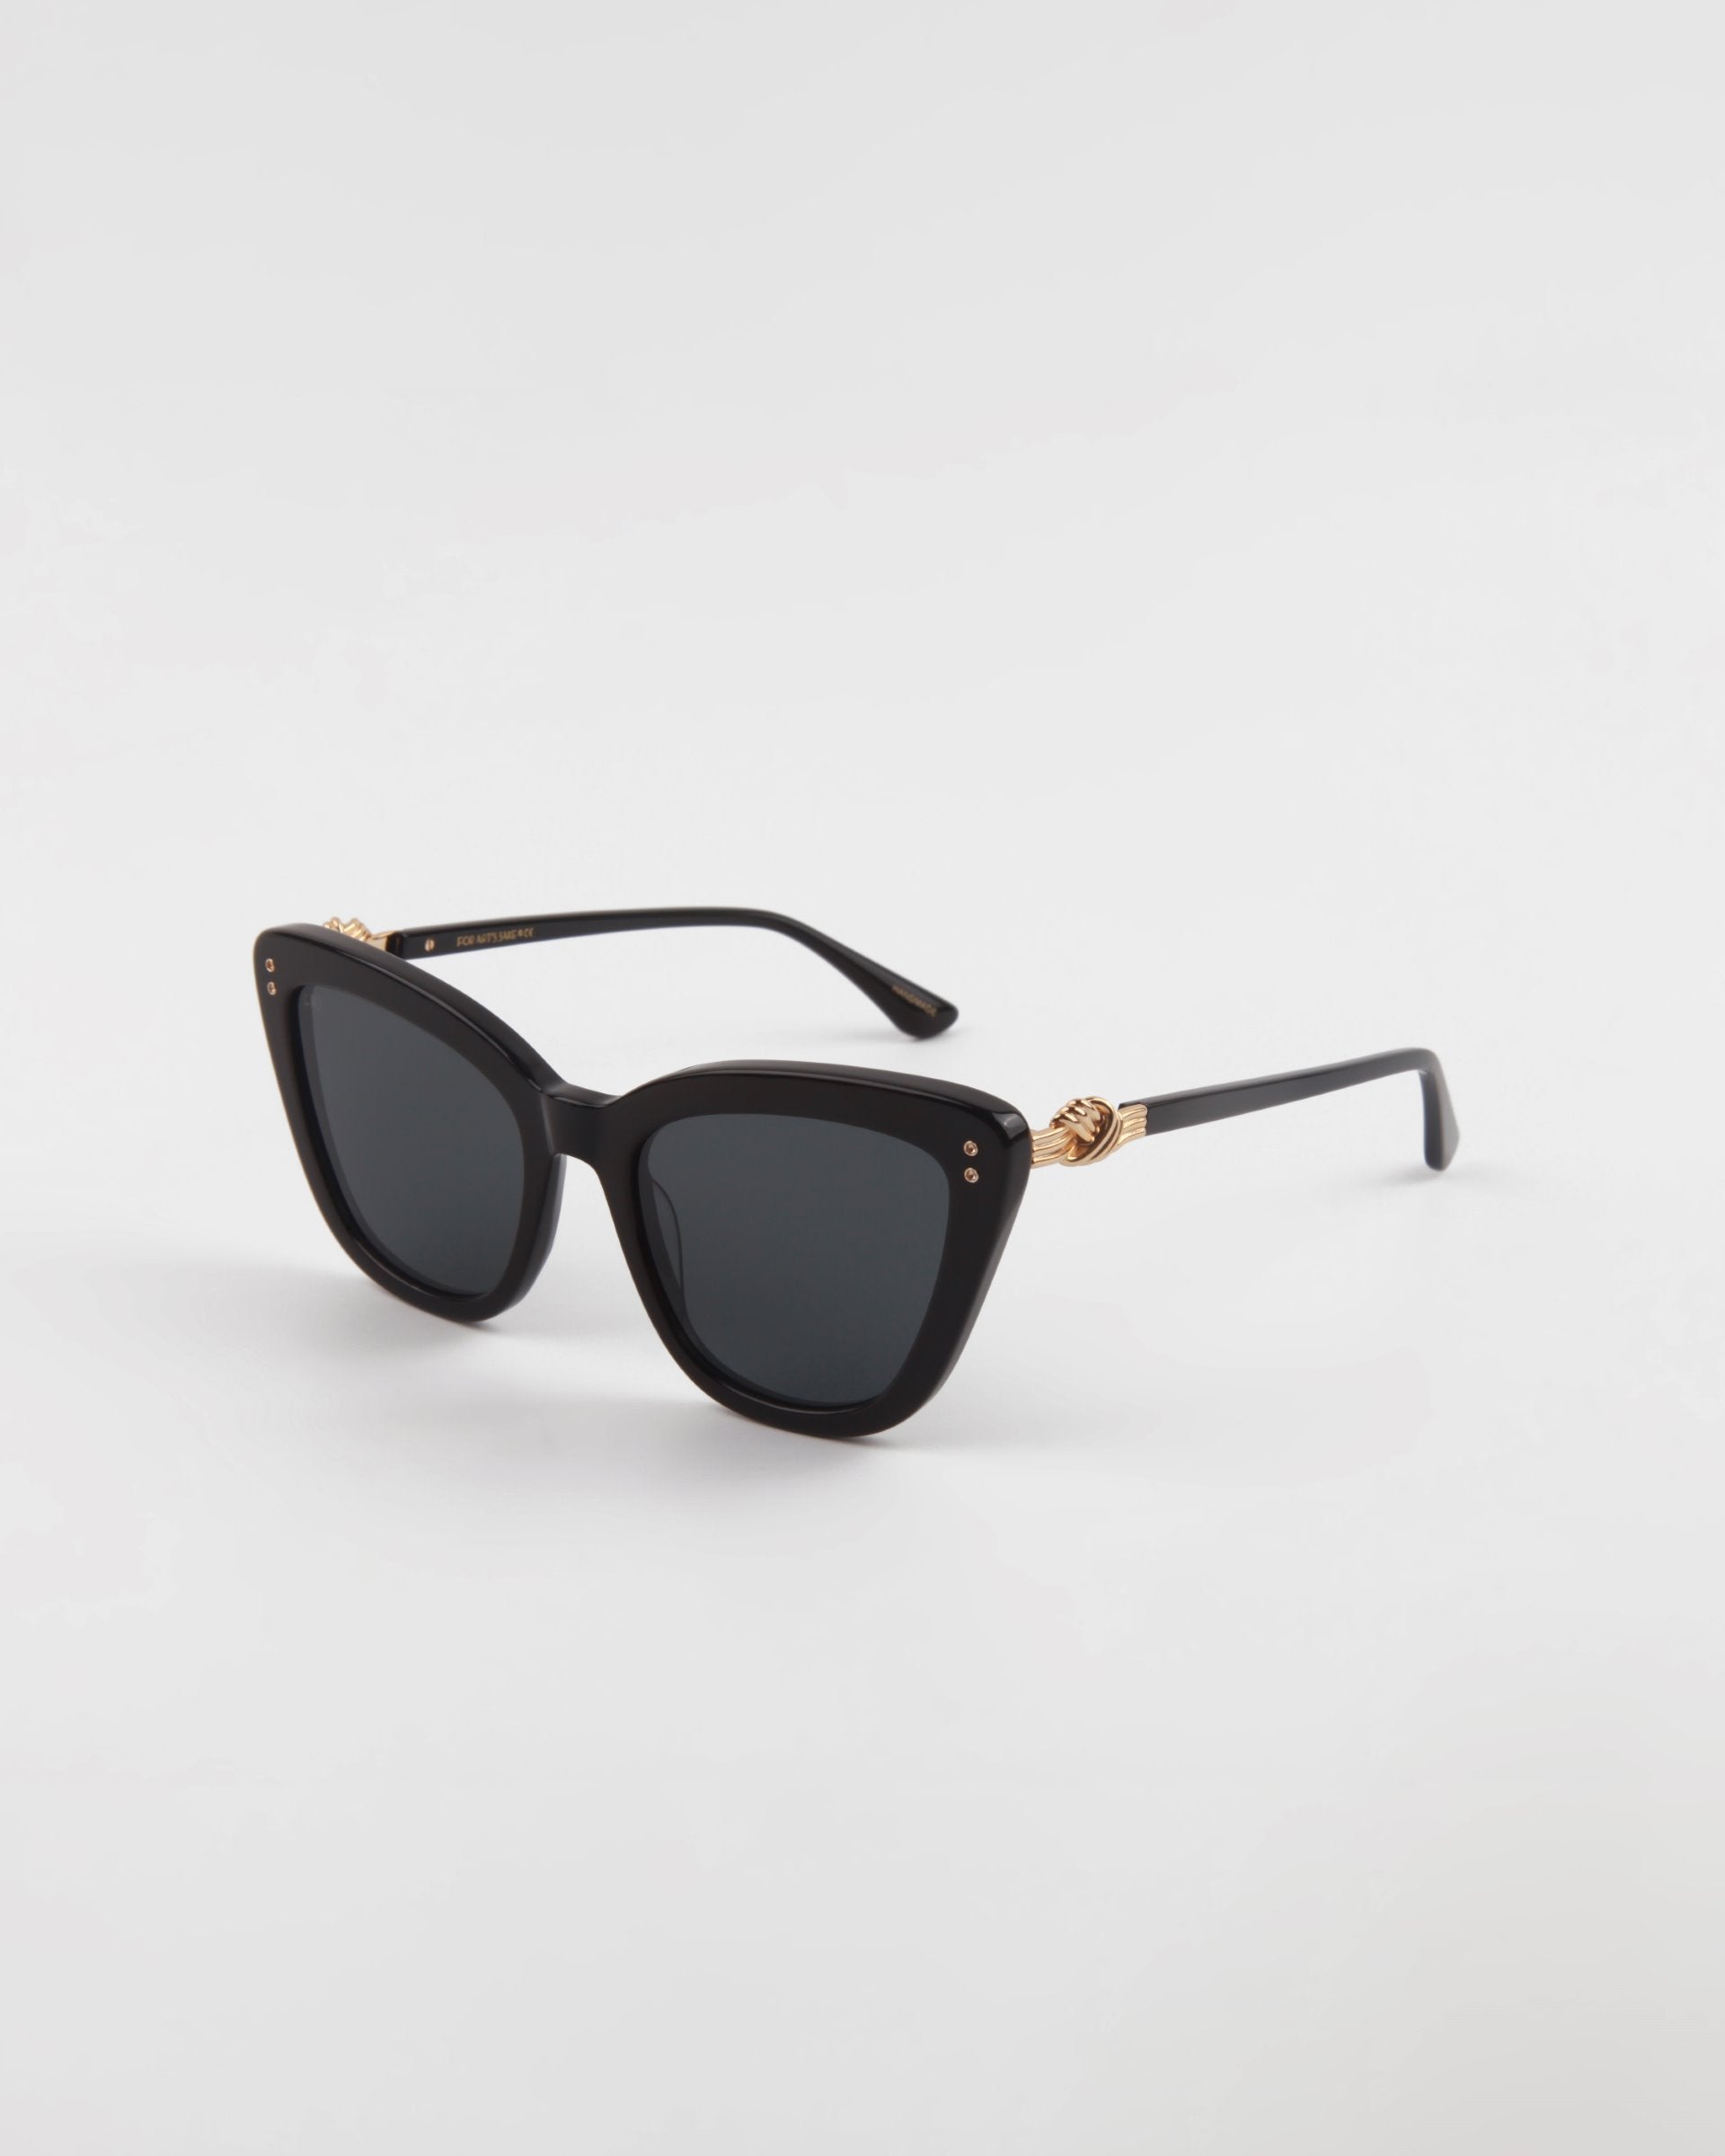 A pair of black, handmade acetate cat-eye **Ice Cream** sunglasses with dark lenses and gold embellishments on the arms from **For Art's Sake®.** The **Ice Cream** sunglasses offer UVA & UVB protection and are set against a plain white background, highlighting their sleek and stylish design.